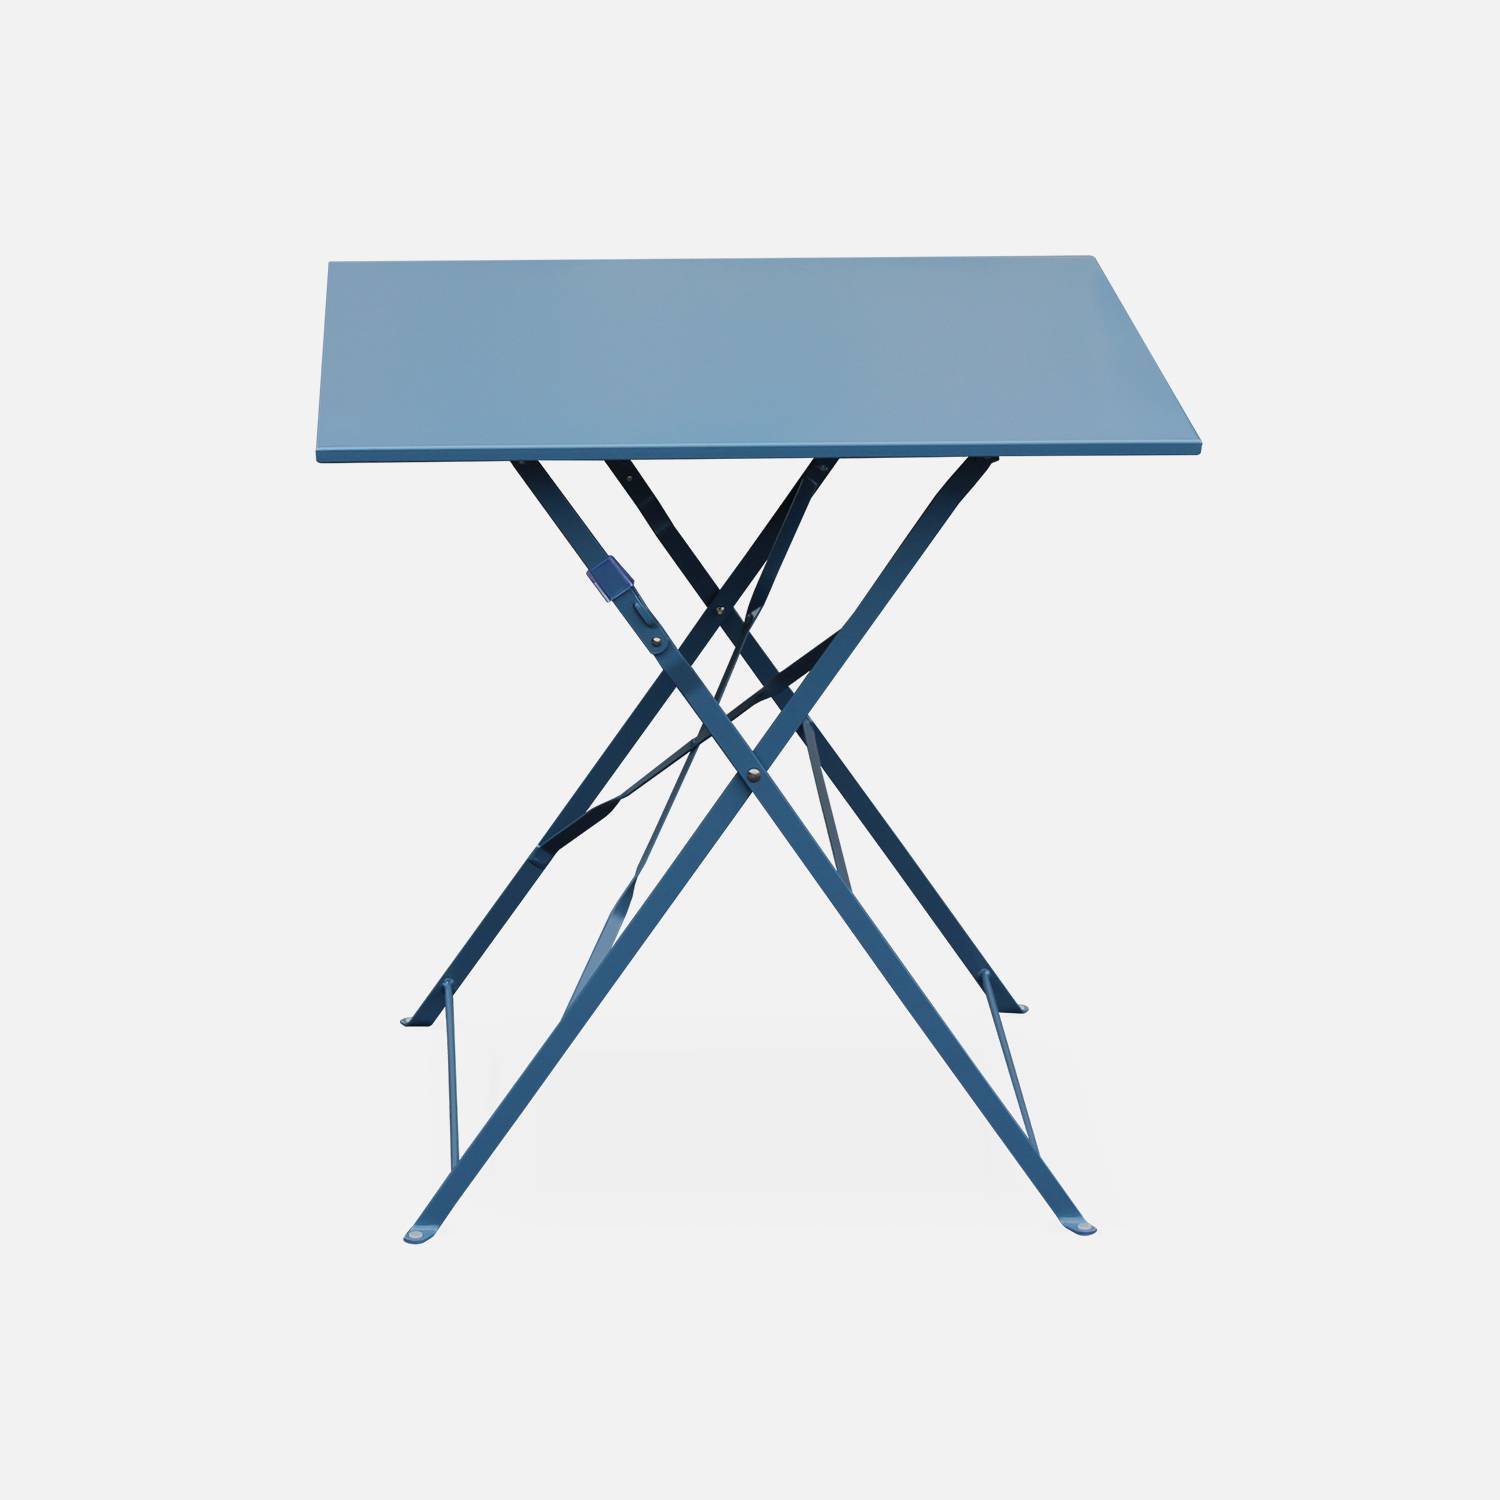 2-seater foldable thermo-lacquered steel bistro garden table with chairs, 70x70cm - Emilia - Grey Blue Photo3